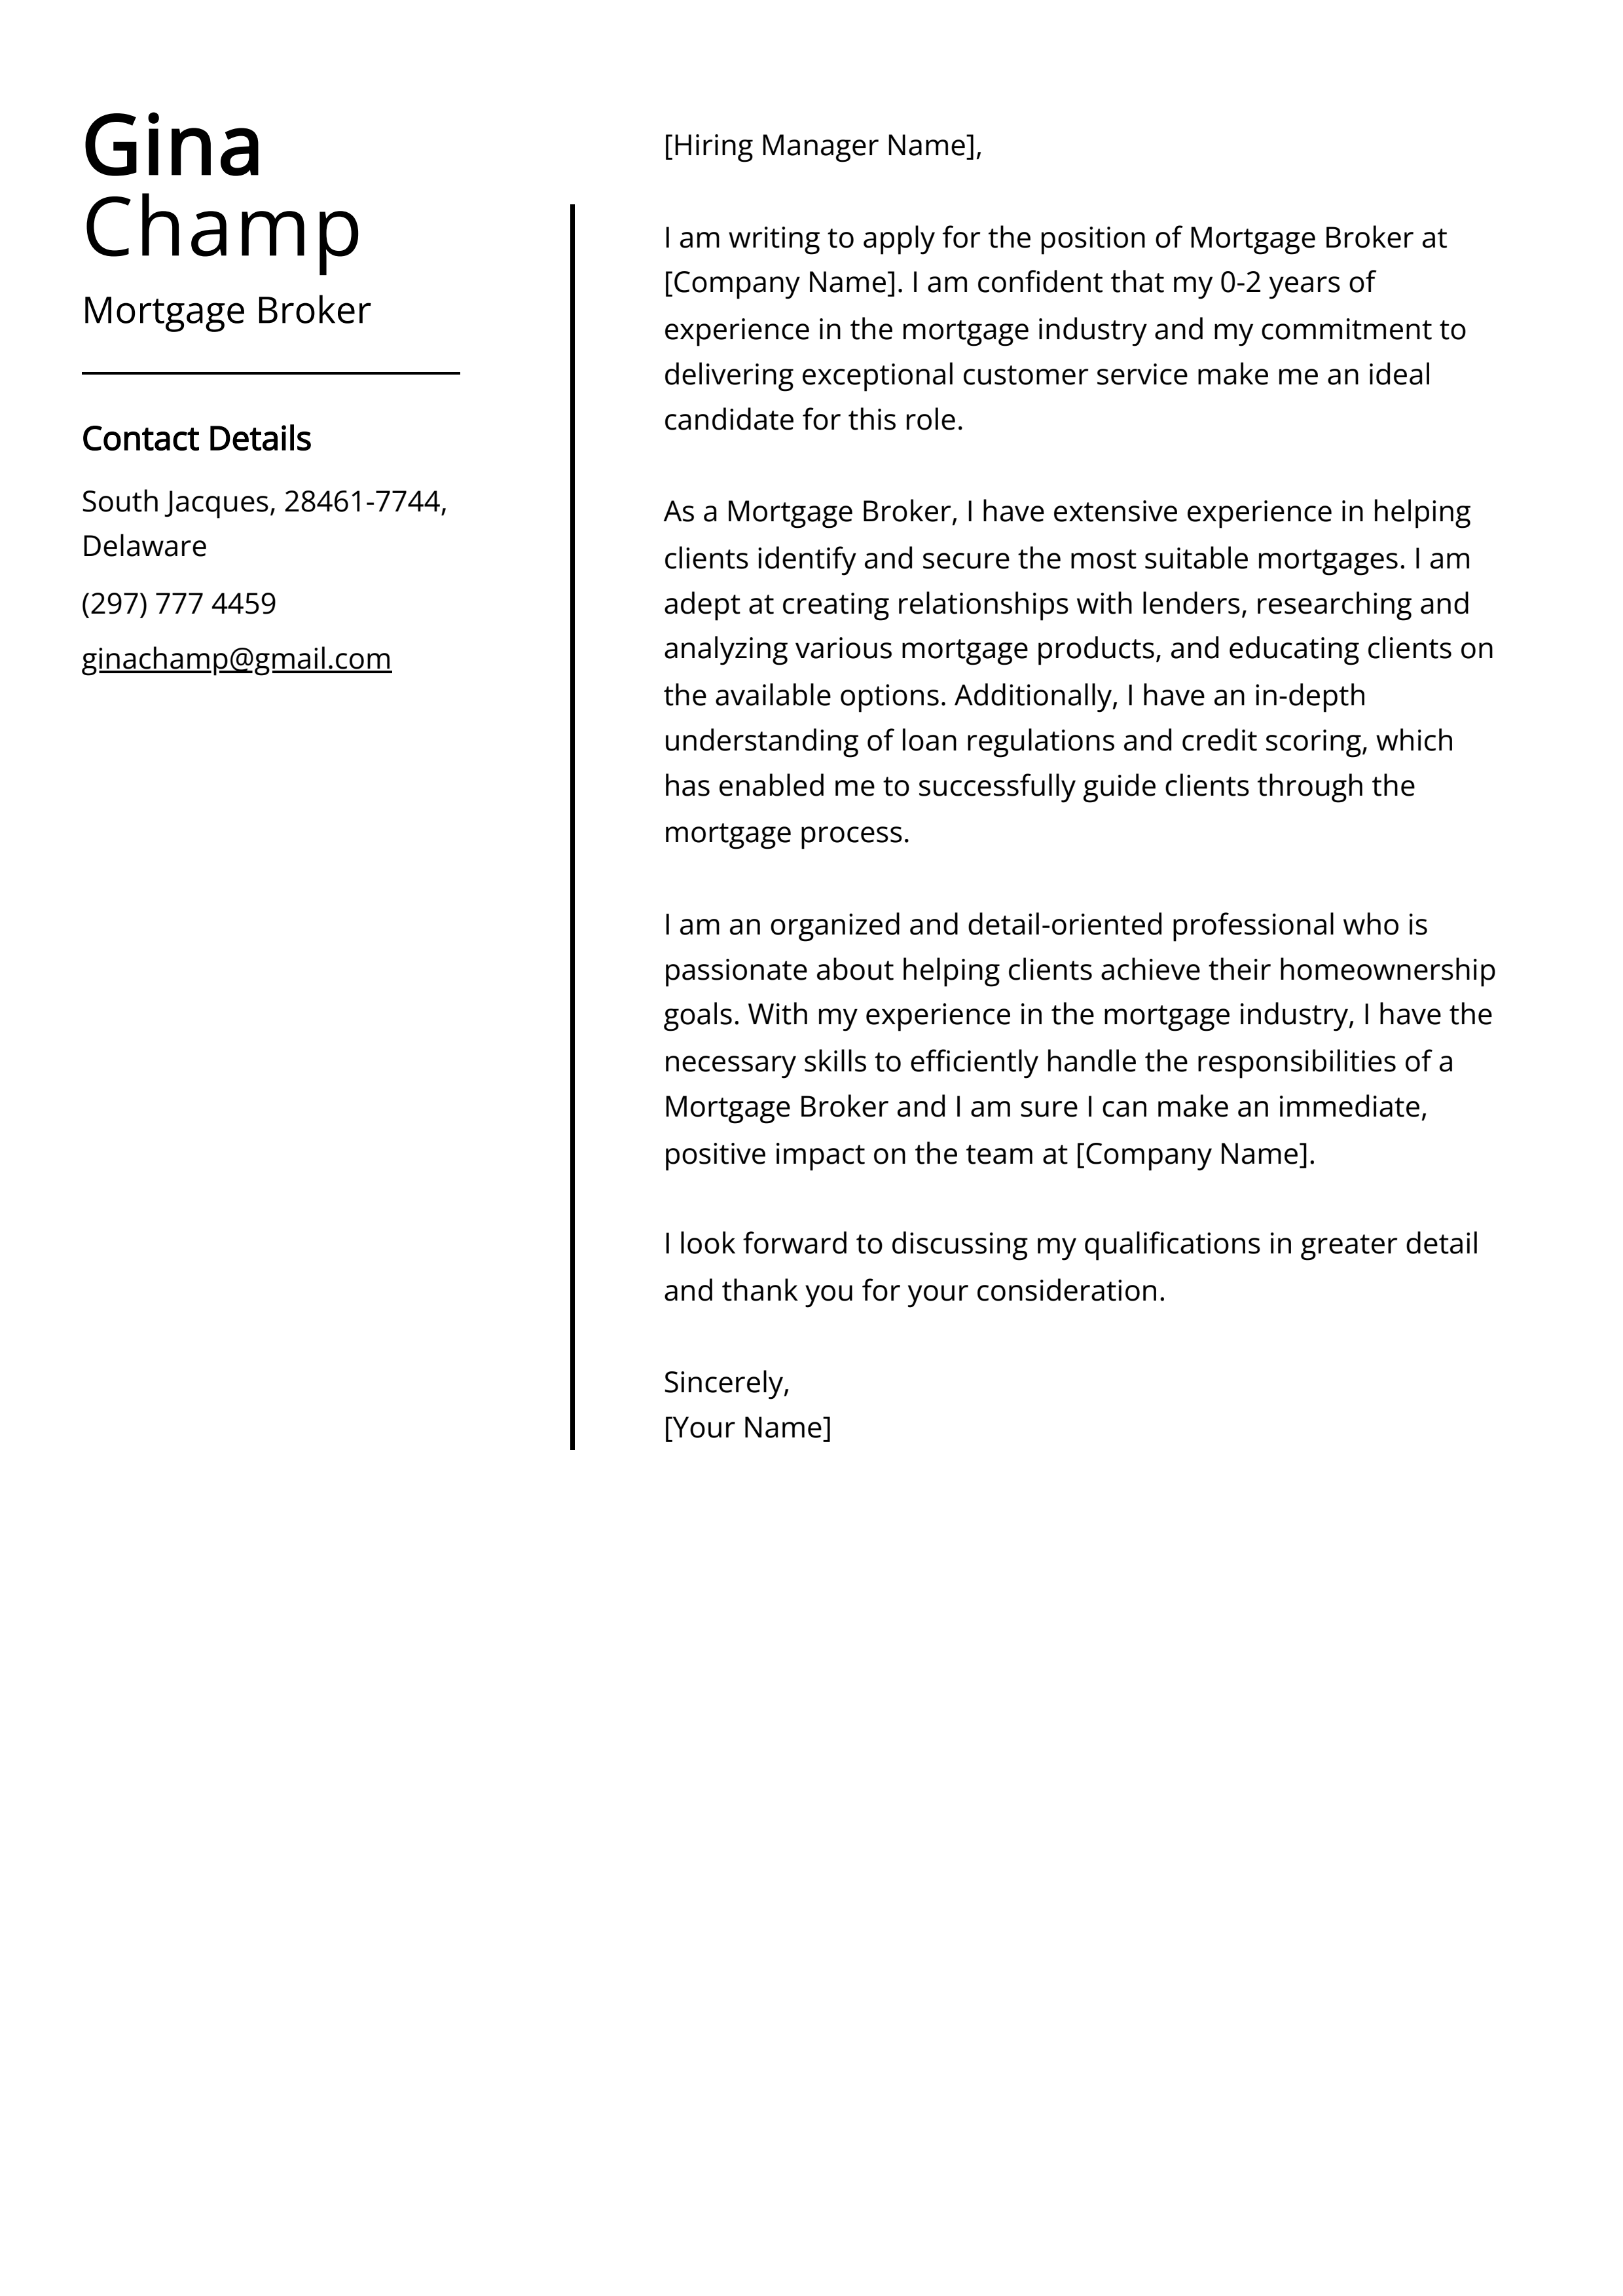 Mortgage Broker Cover Letter Example